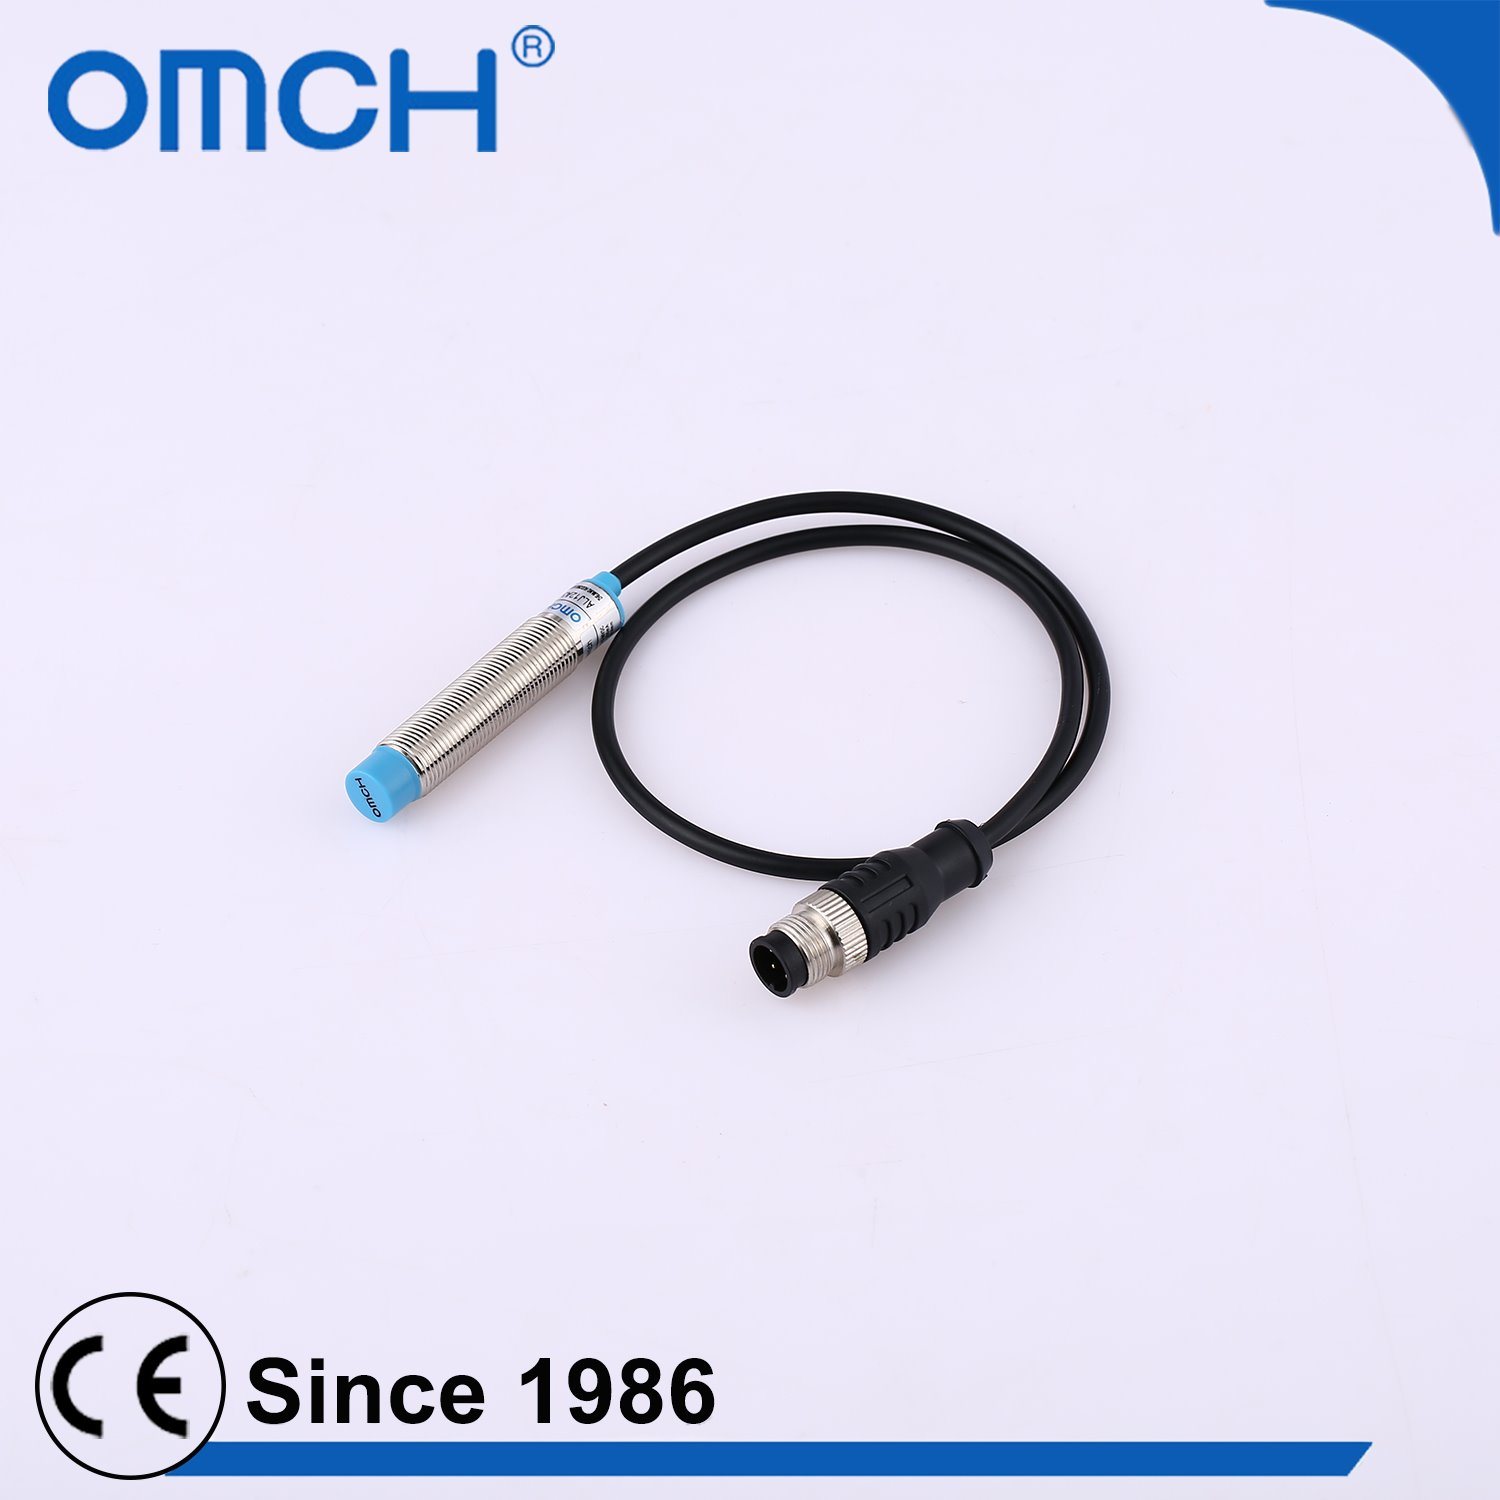 M12 IP65 Inductive Proximity Sensor with Wire and Connector